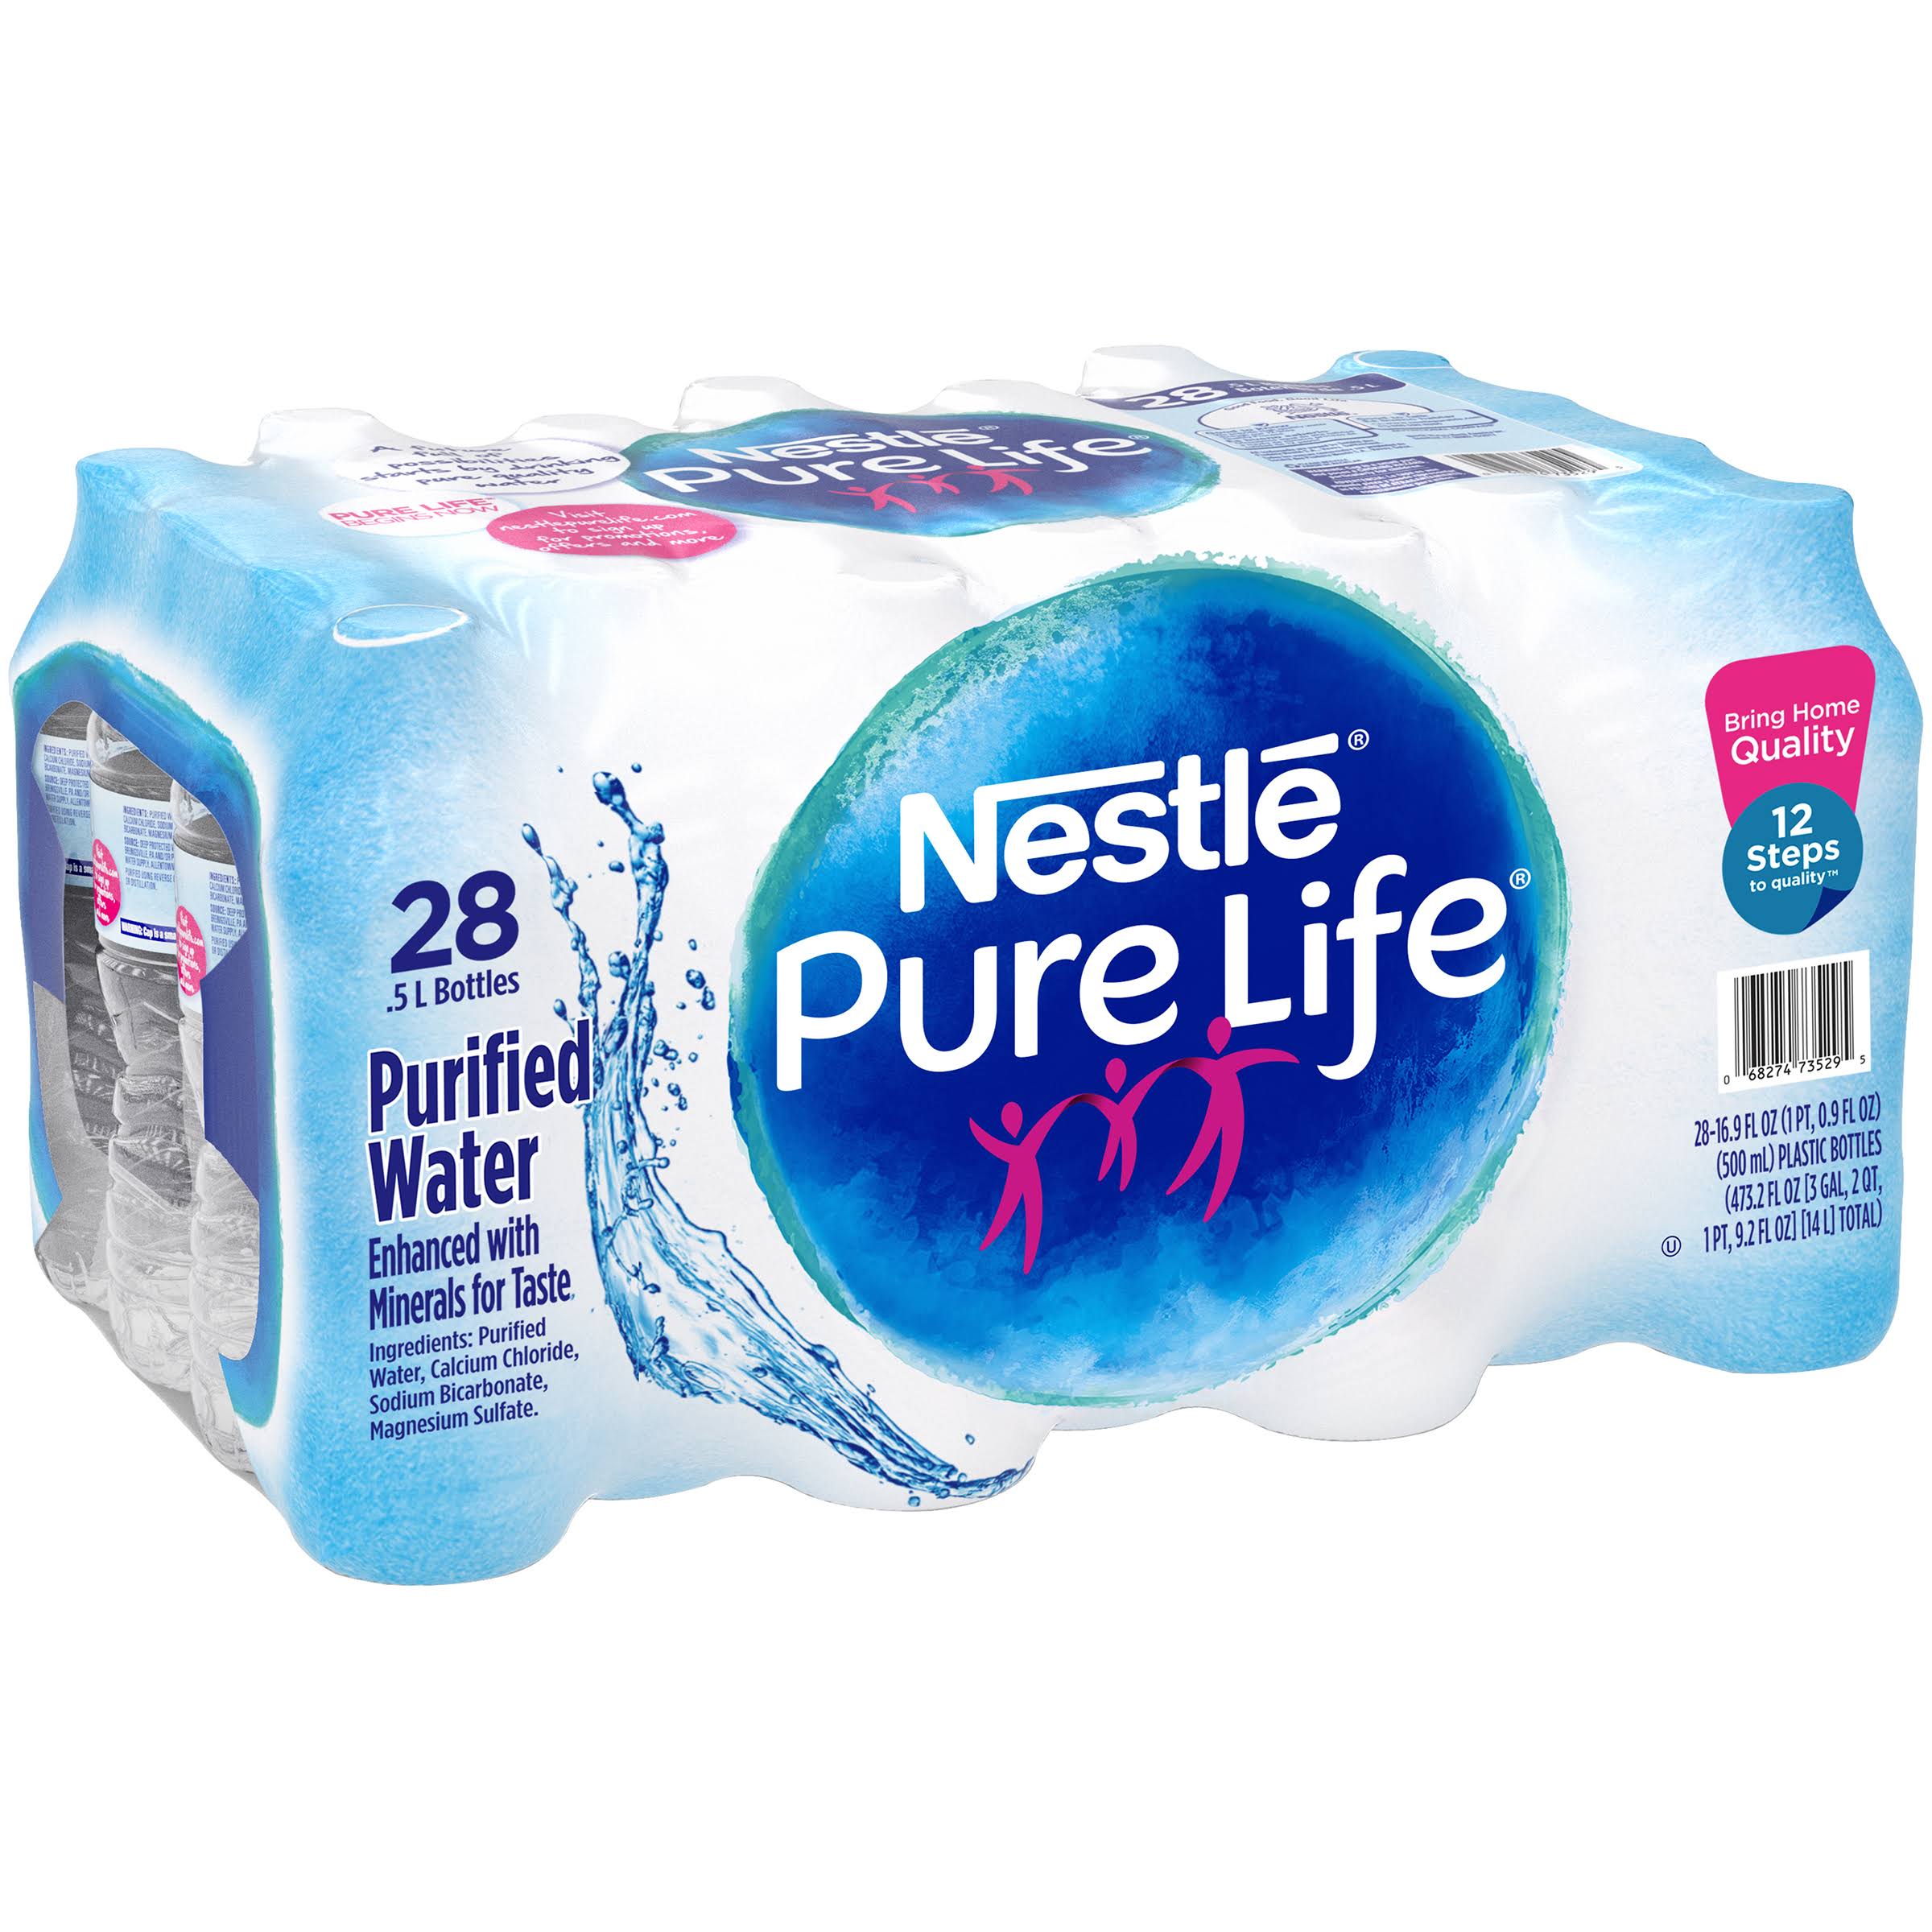 Nestle Pure Life Purified Water - 16.9oz, 28ct